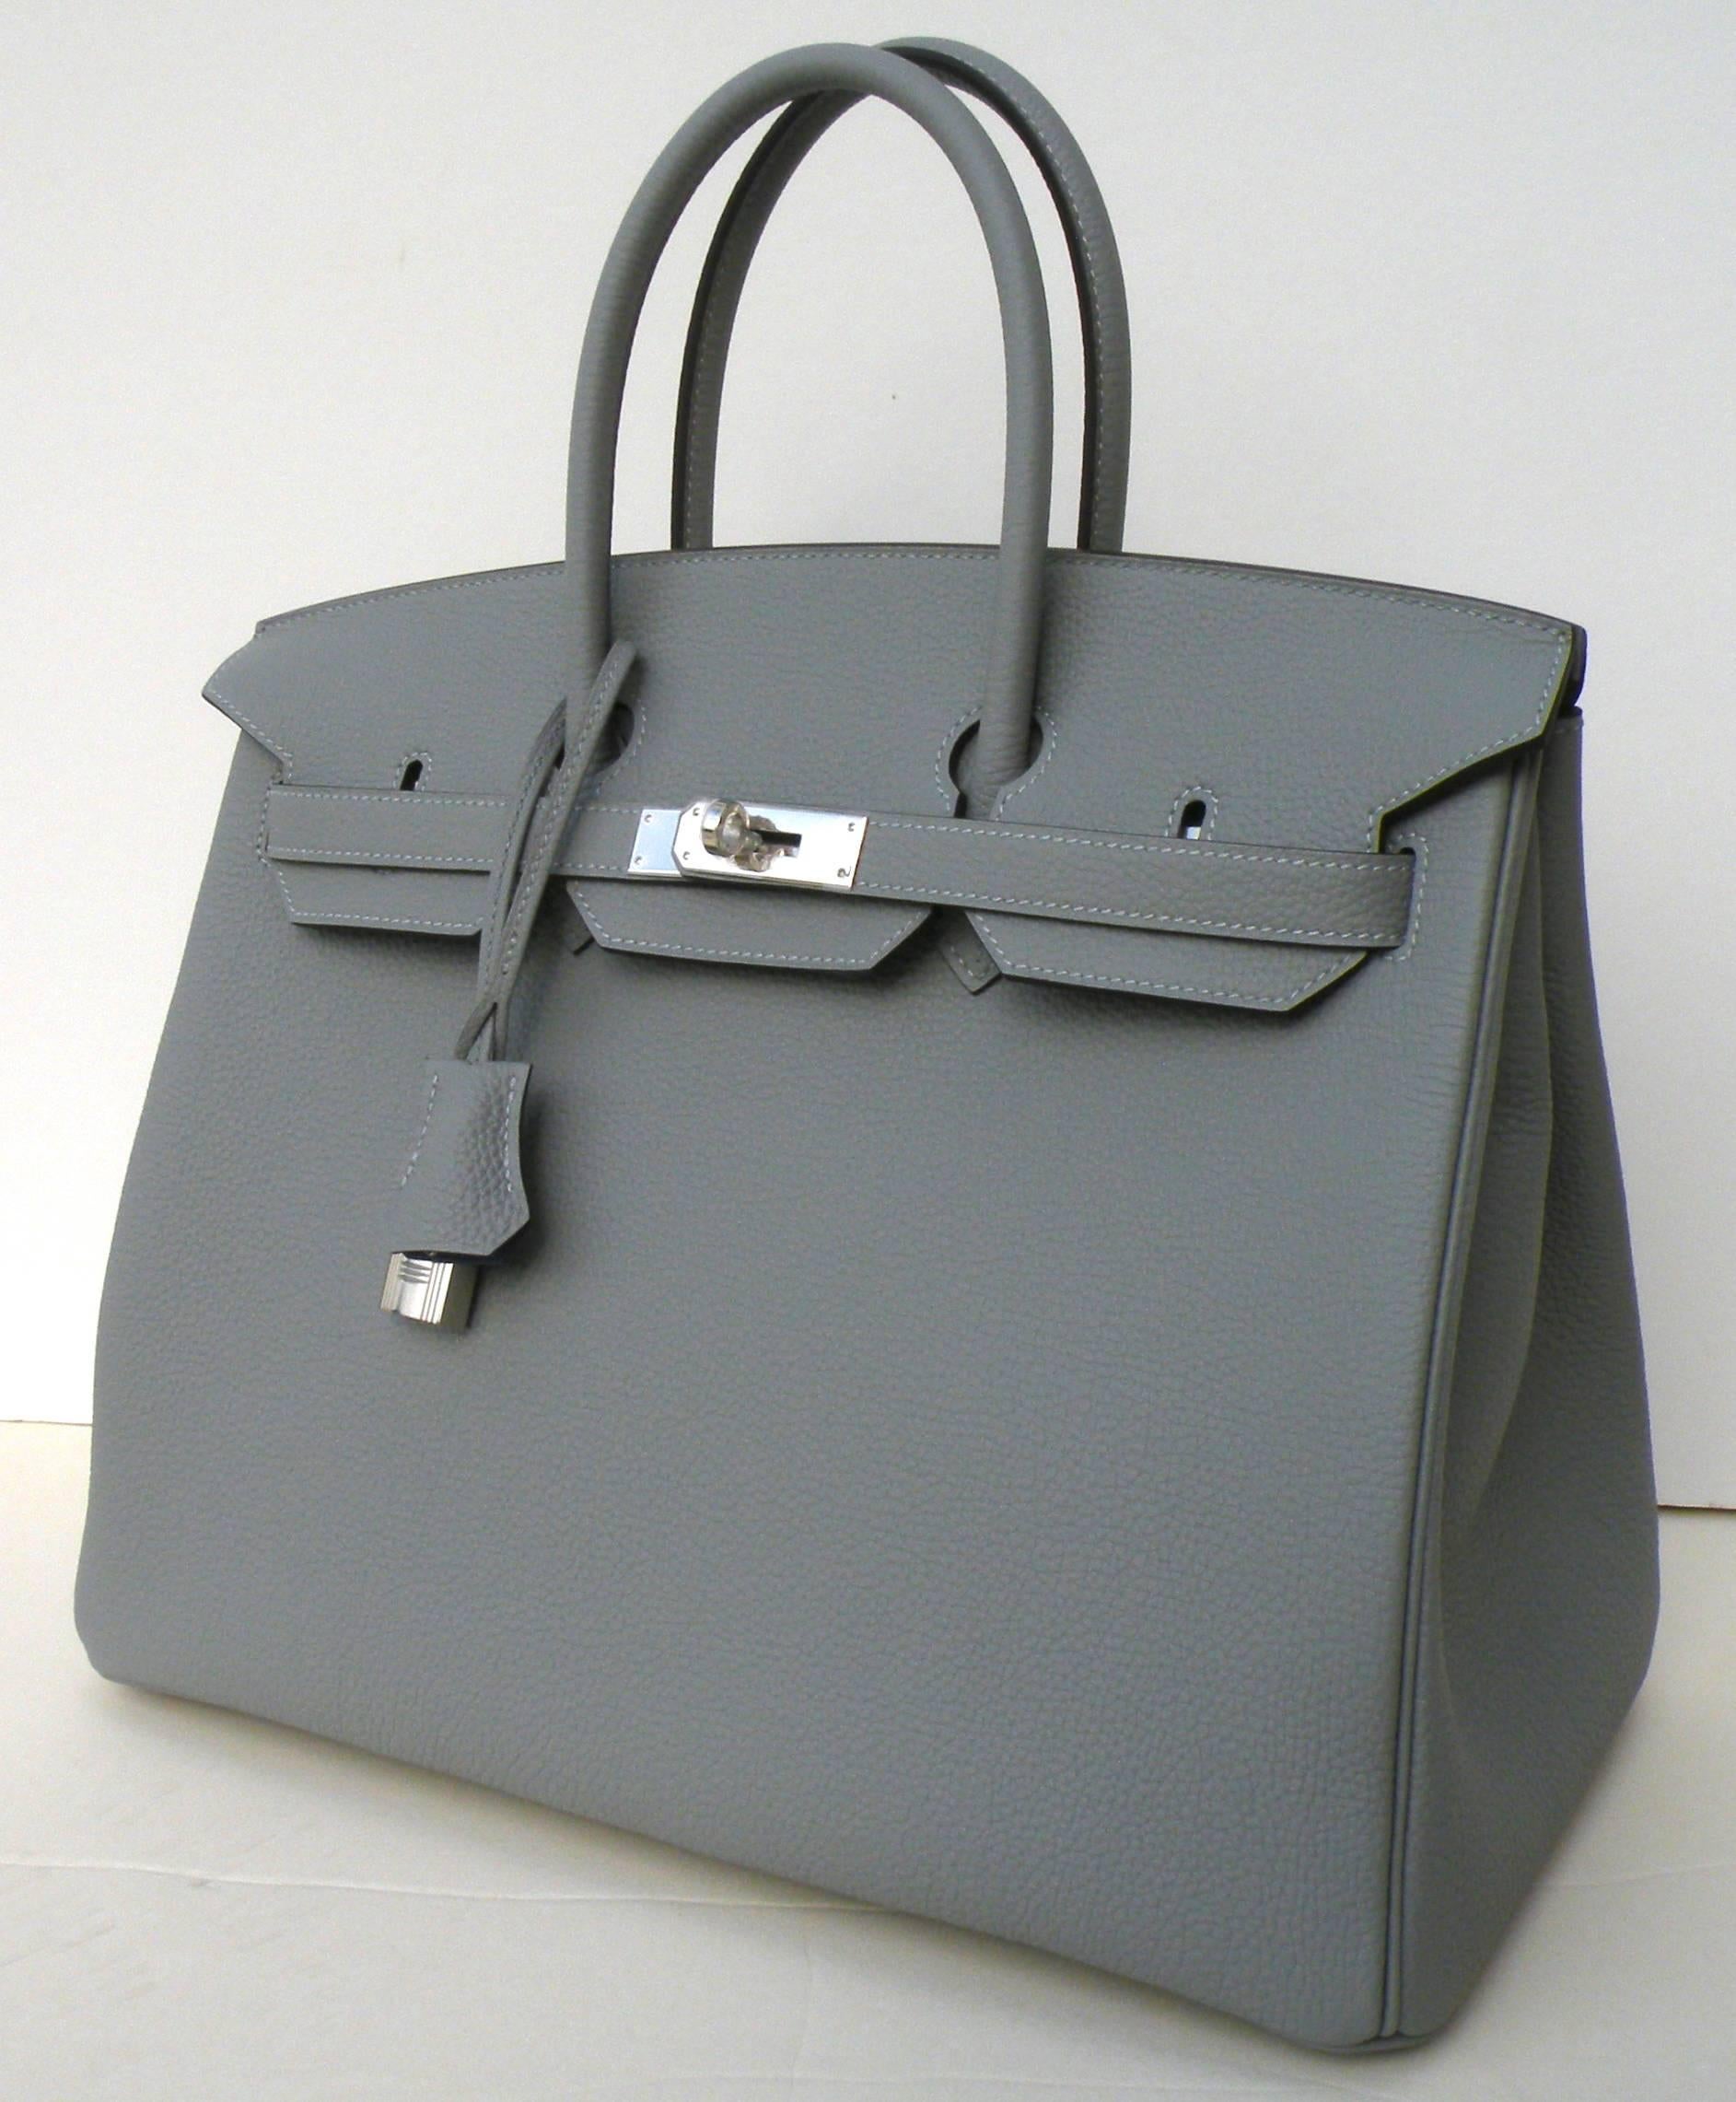 Hermes Birkin Bag  Limited Edition Gris Mouette Verso , lined in Blue Agate  with Palladium Hardware
Size is 35cm
Togo Leather
Such a pretty limited edition
11 in. Hx7 in.D x 13.75 in L
28 cm H x18 cmDx35 cm L
We also have it in the Black Verso,